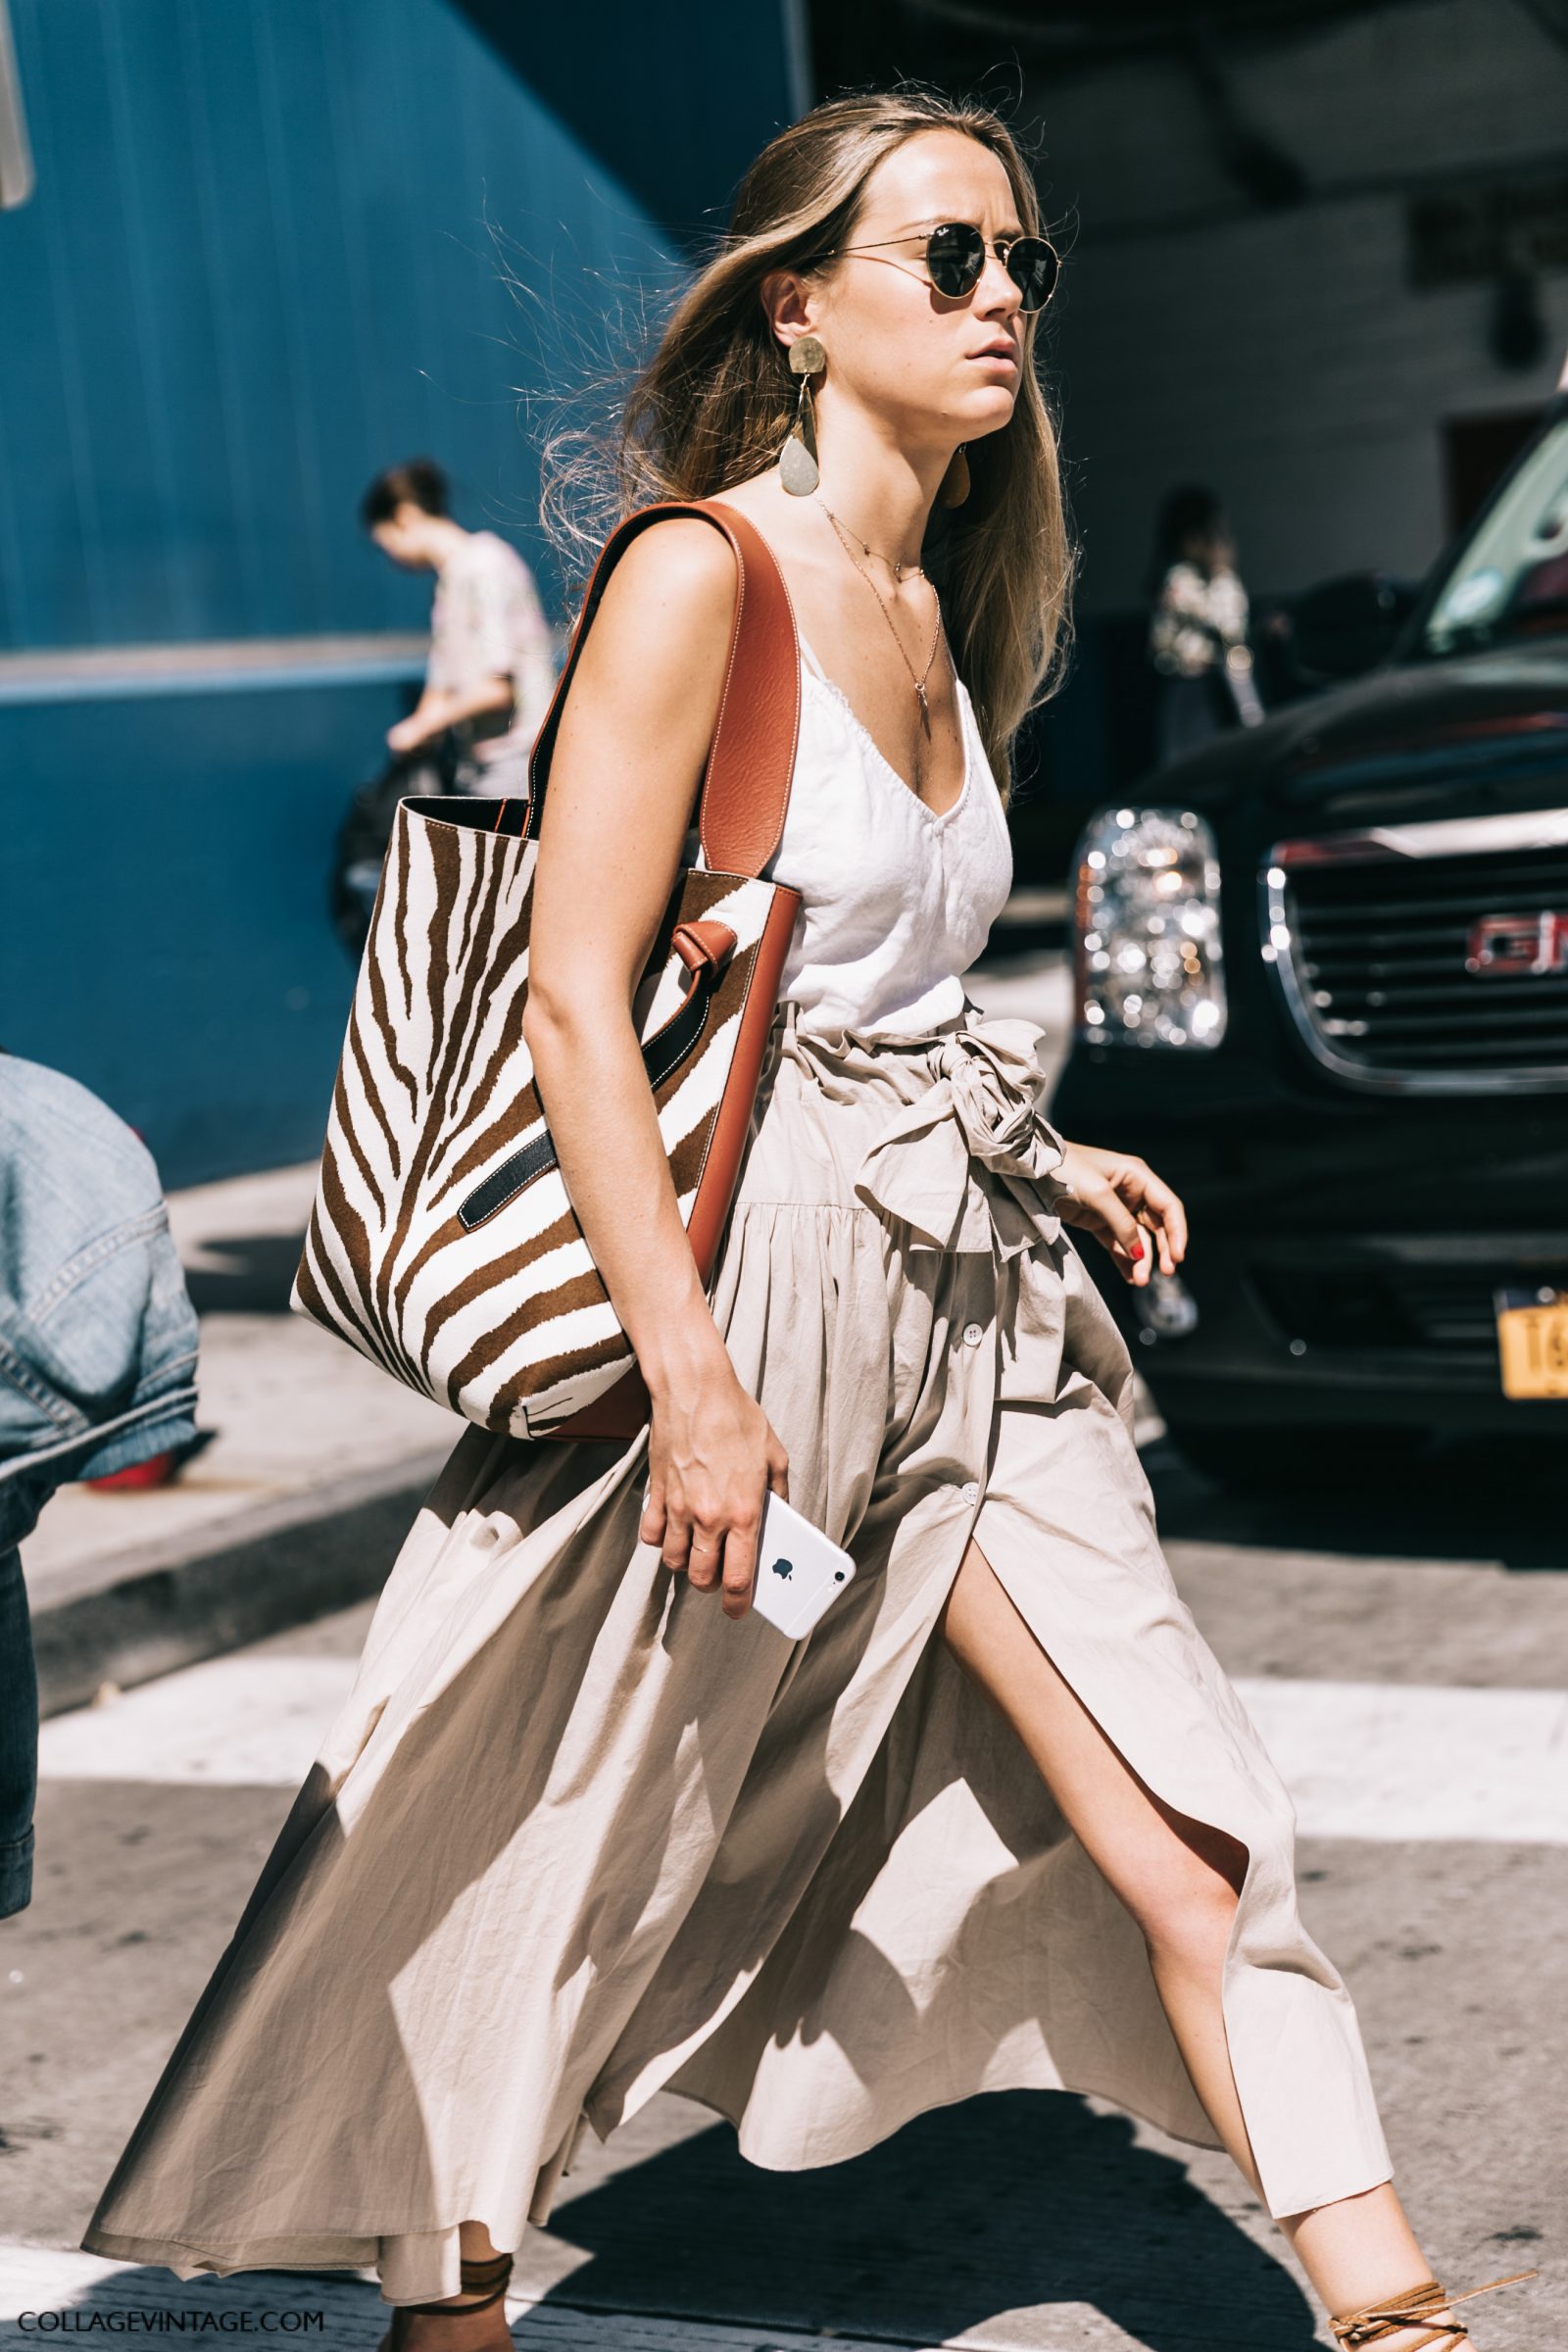 nyfw-new_york_fashion_week_ss17-street_style-outfits-collage_vintage-vintage-del_pozo-michael_kors-hugo_boss-156